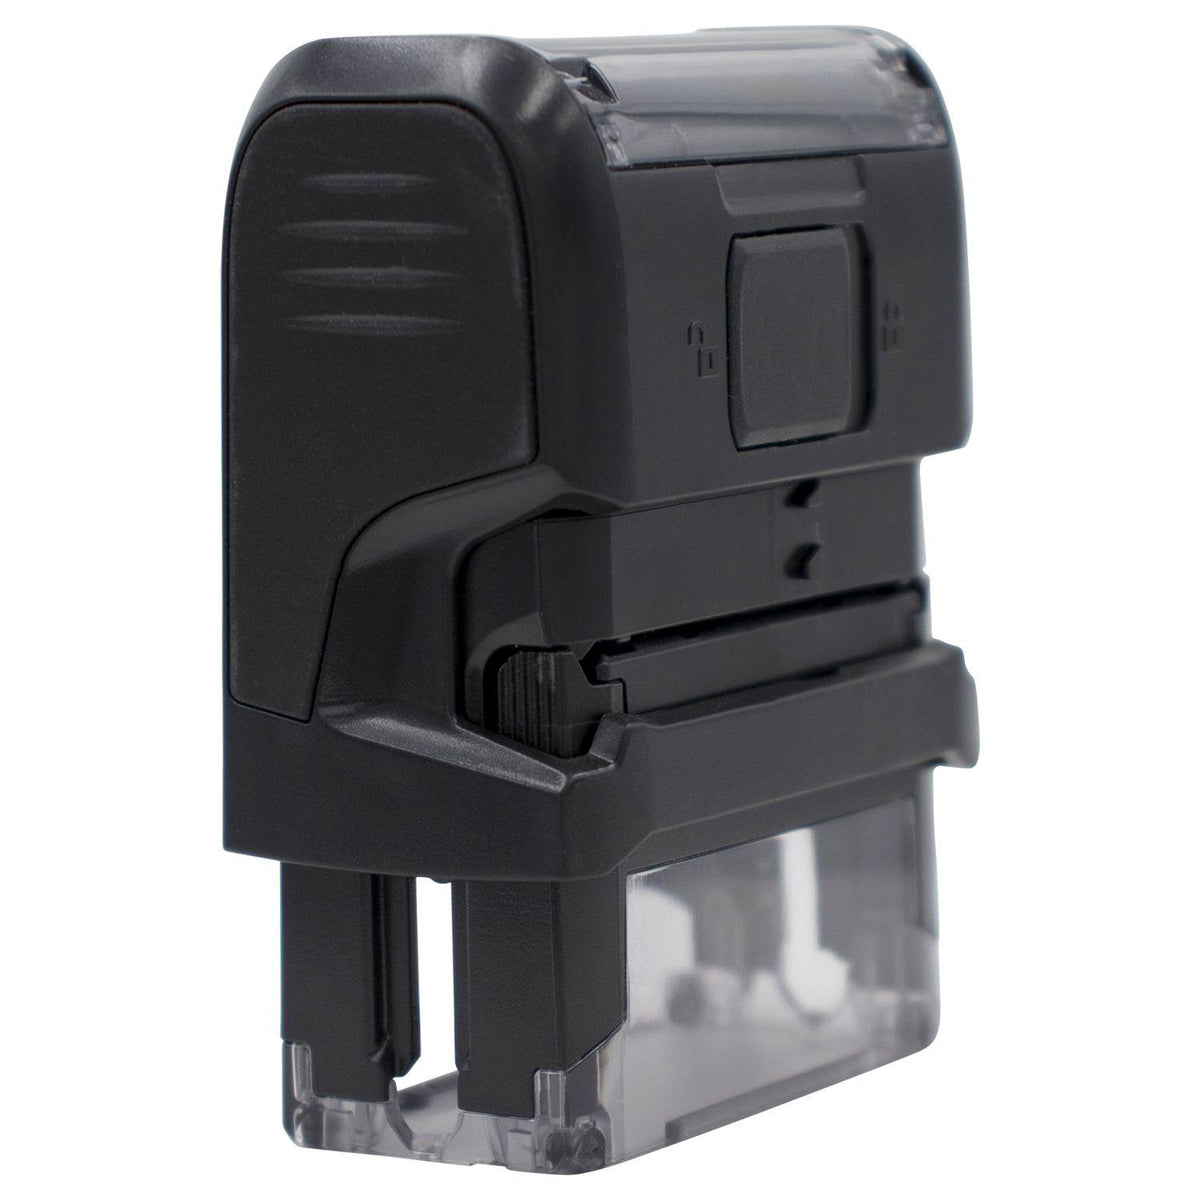 Self-Inking Social Distancing Stamp - Engineer Seal Stamps - Brand_Trodat, Impression Size_Small, Stamp Type_Self-Inking Stamp, Type of Use_Medical Office